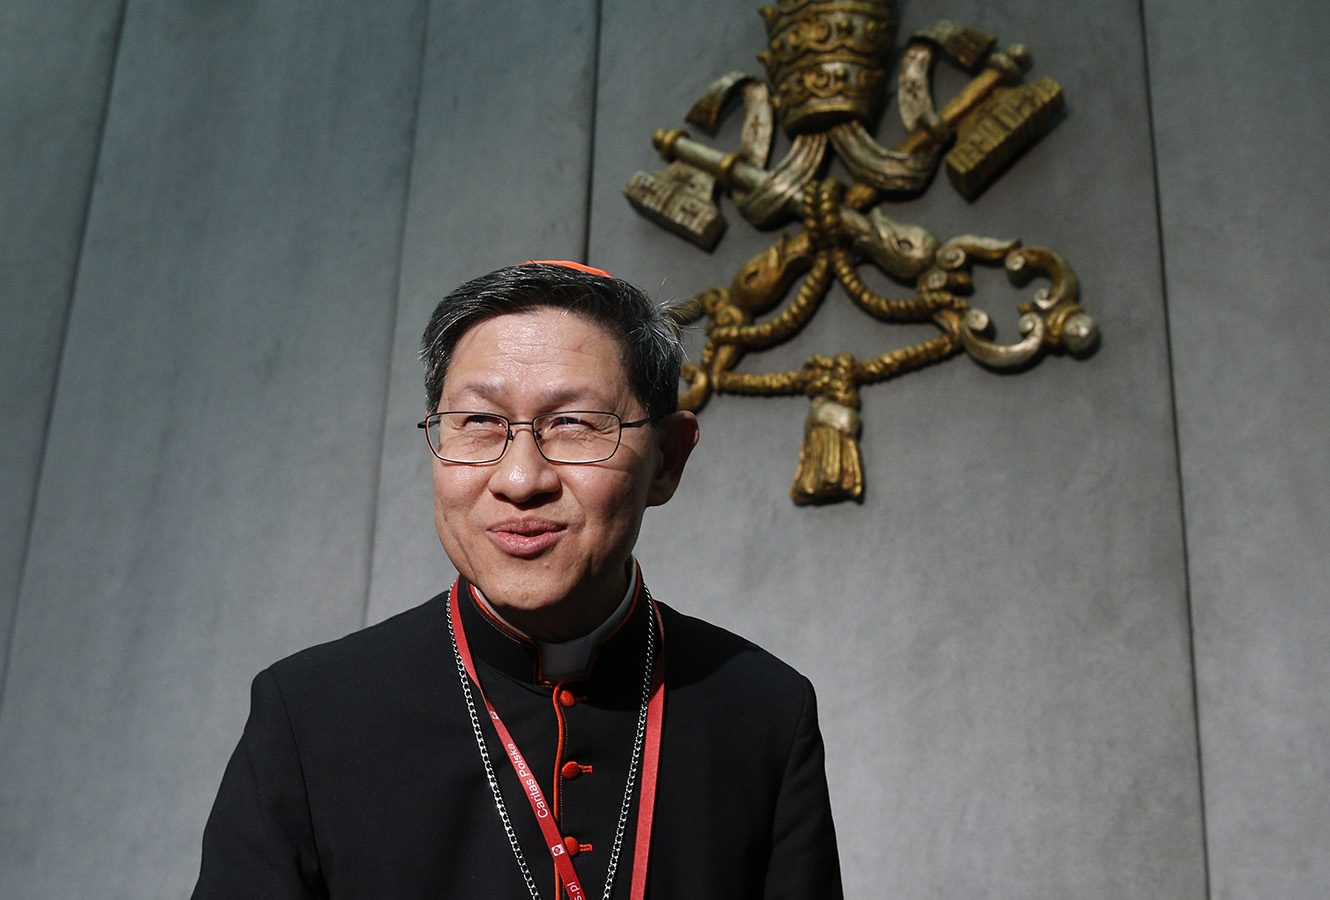 Pope appoints Cardinal Tagle to top Vatican post